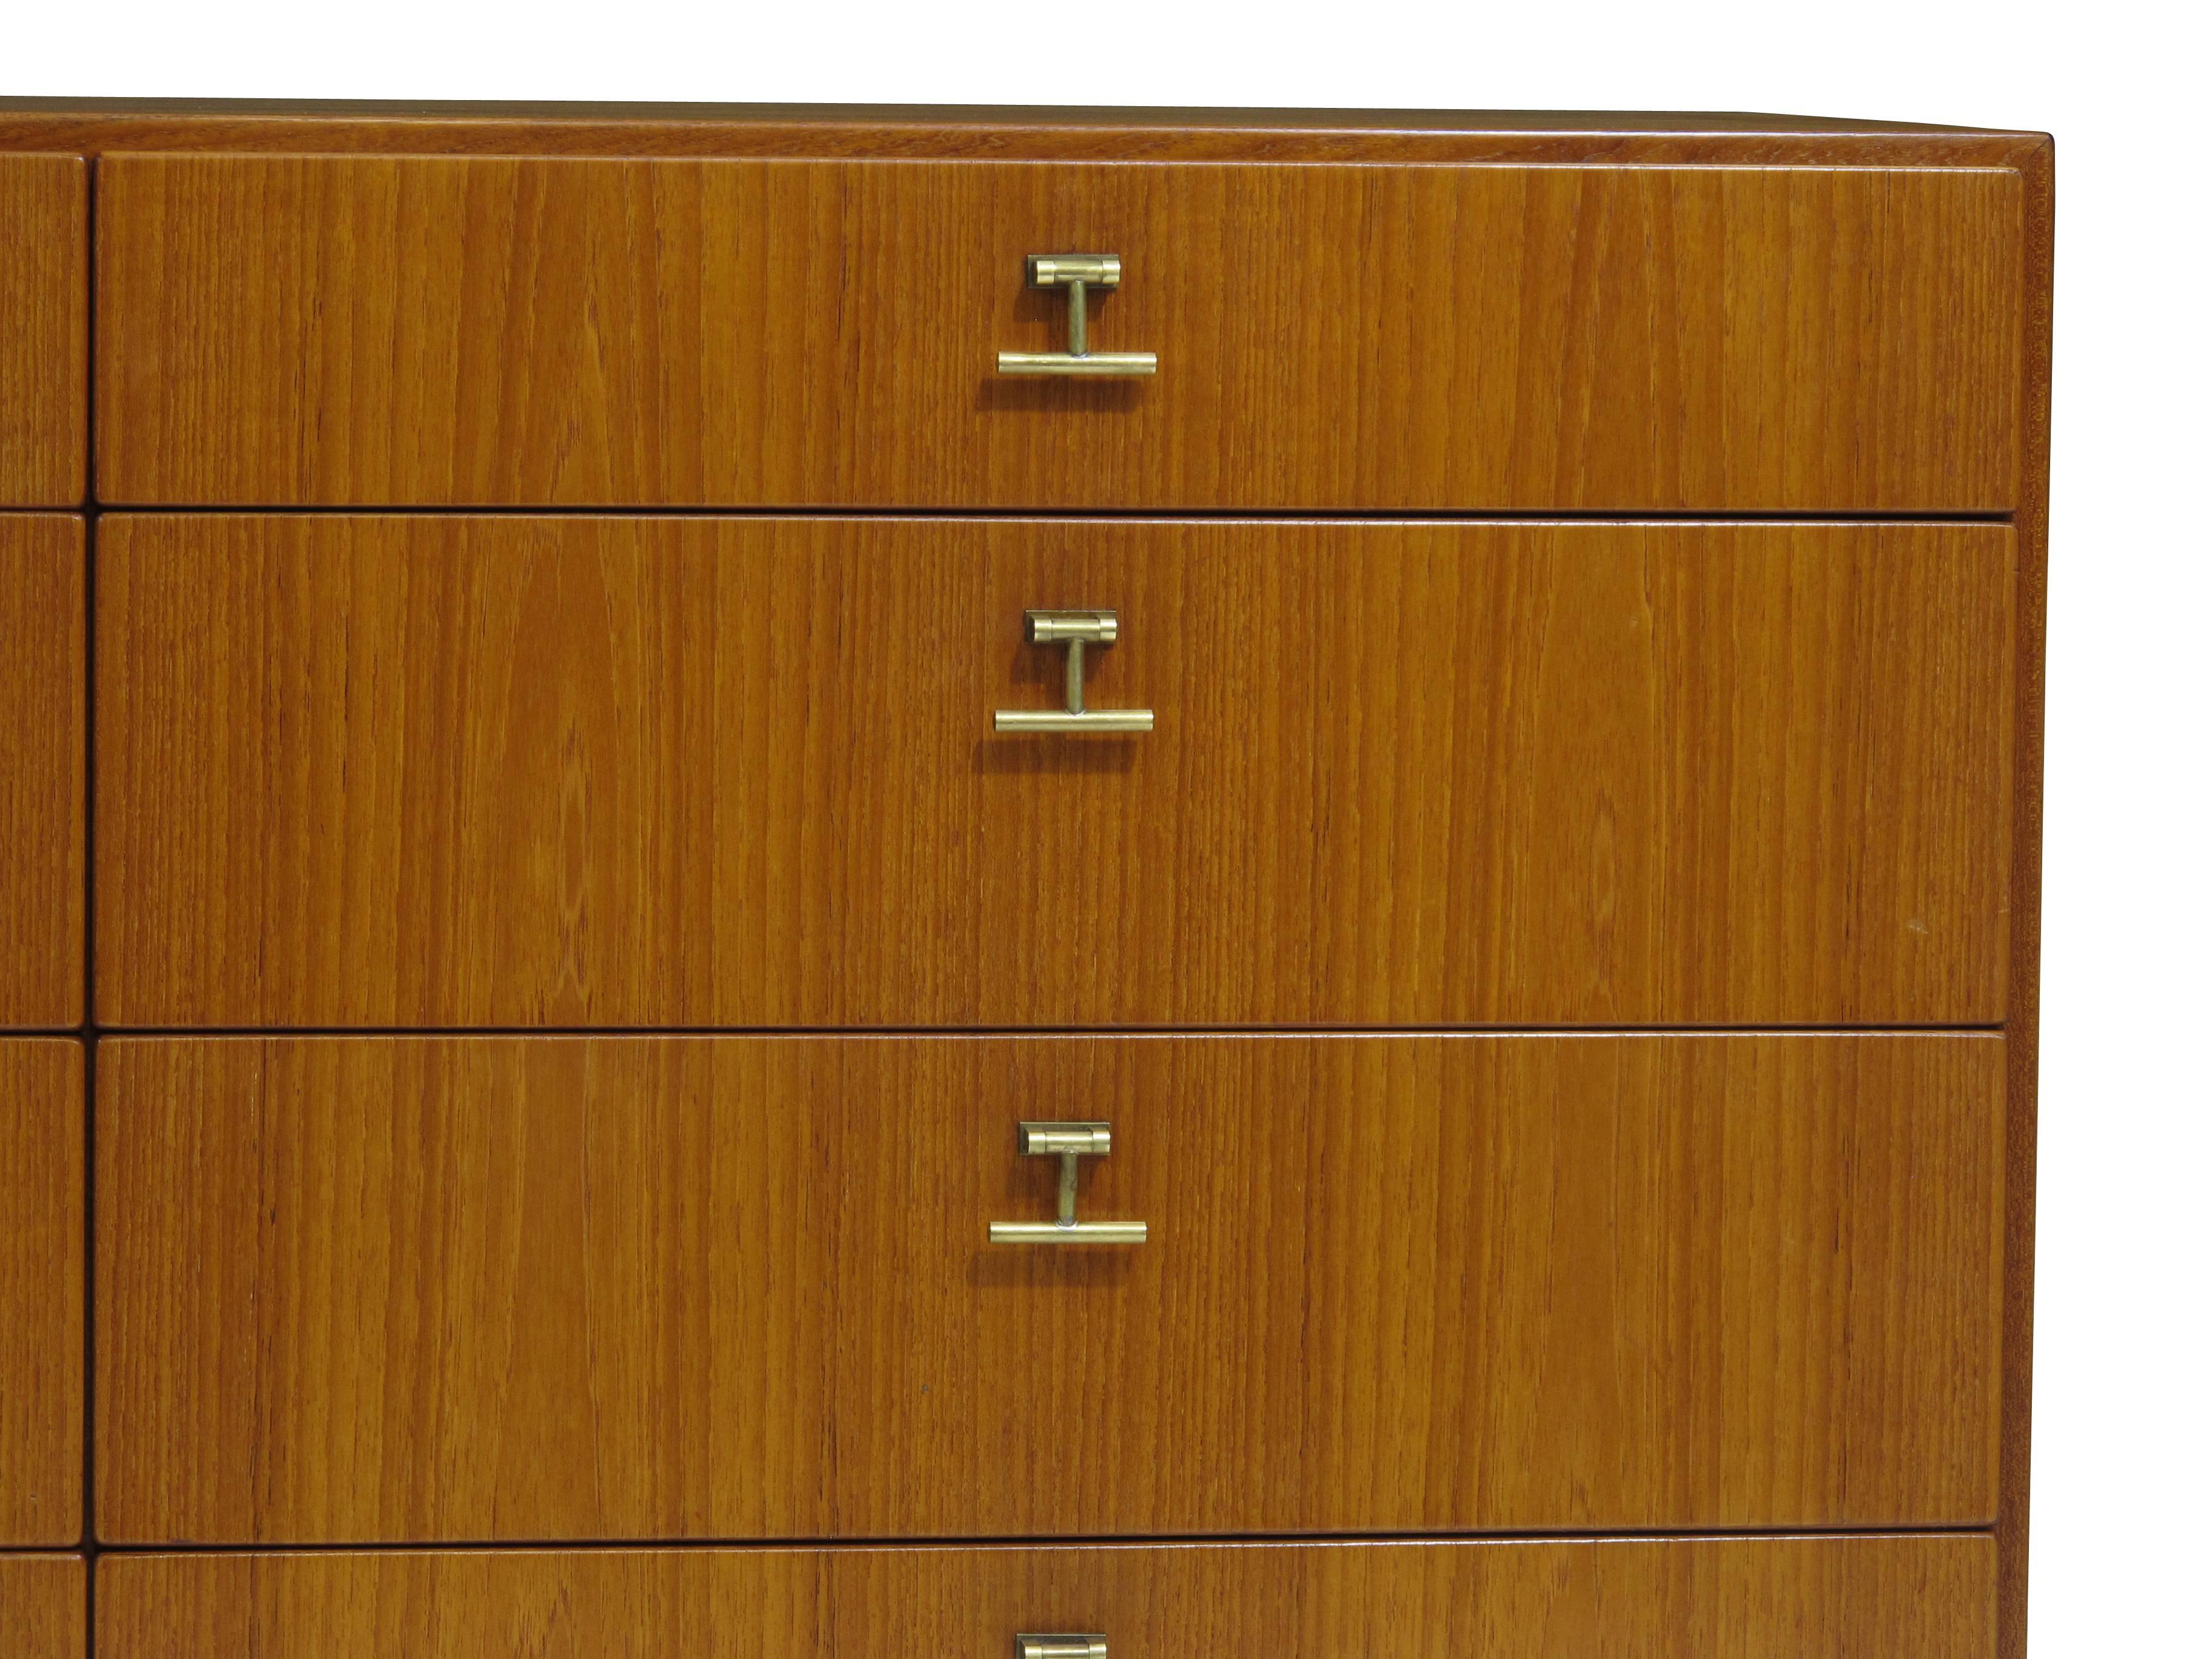 Oiled Borge Mogensen Teak Chest of Drawers with Brass Pulls